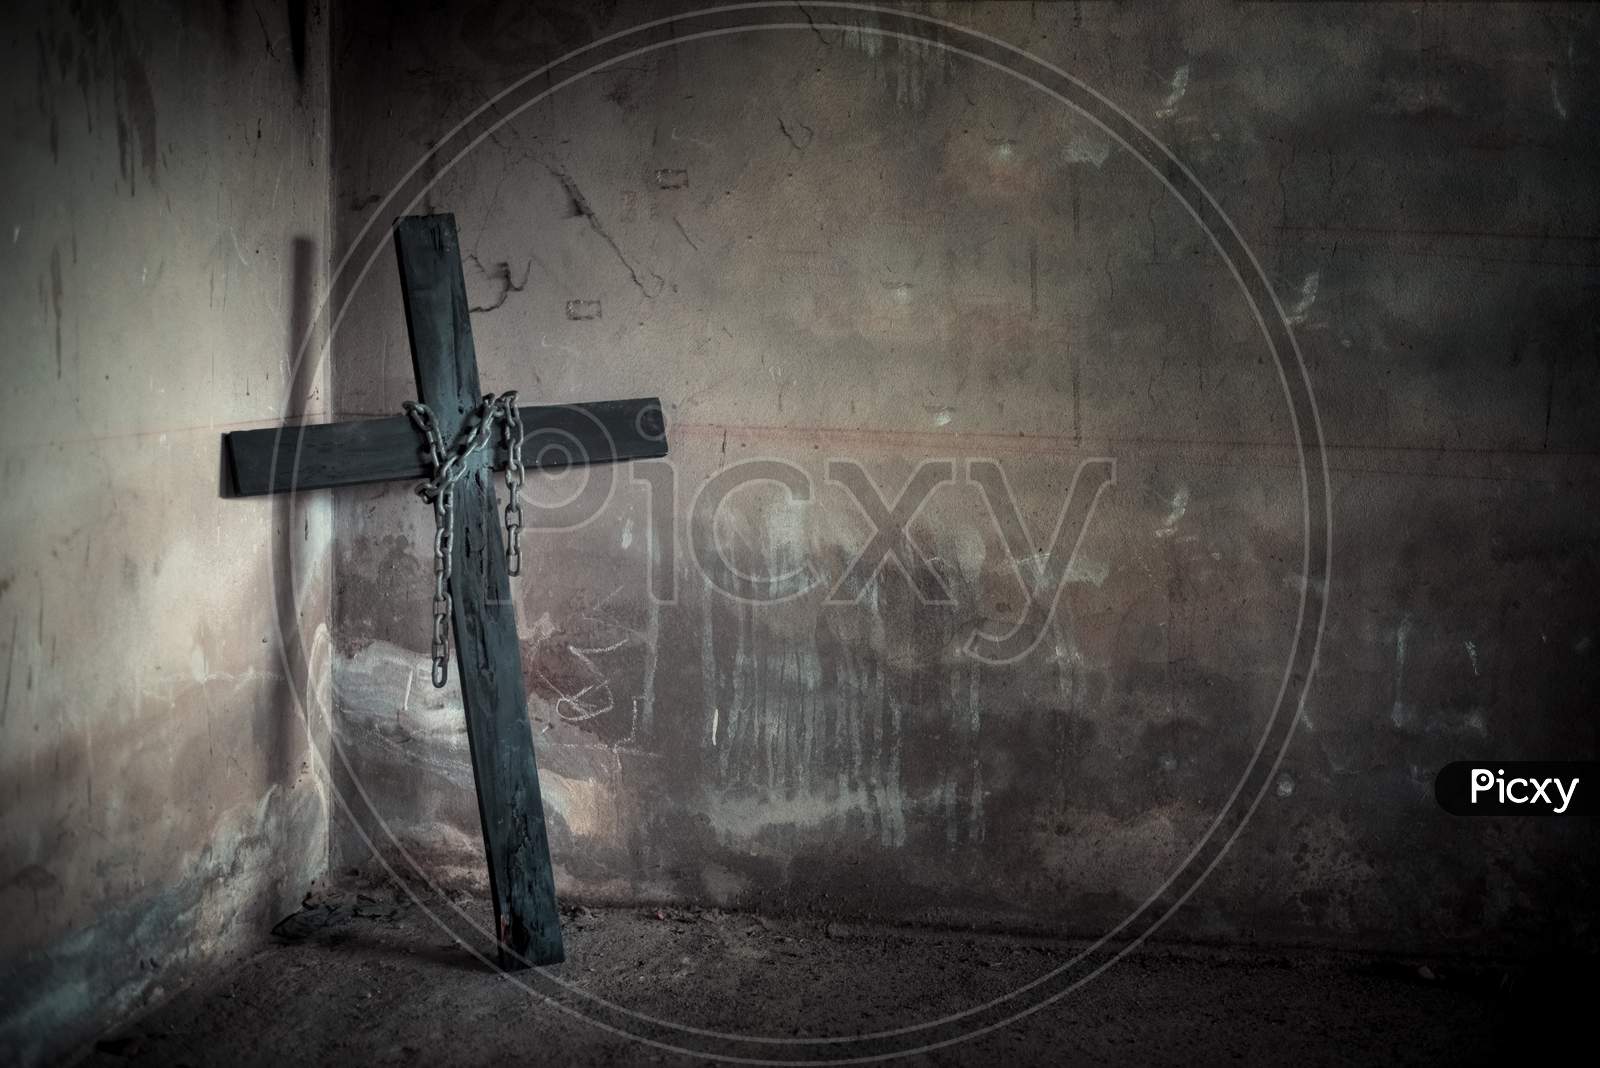 Black Cross Against Wall With Hanging Steel Chain And Gun. Halloween Day Party Festival Celebration. Ancient Sign Of Religion. Dark And Scary Tone